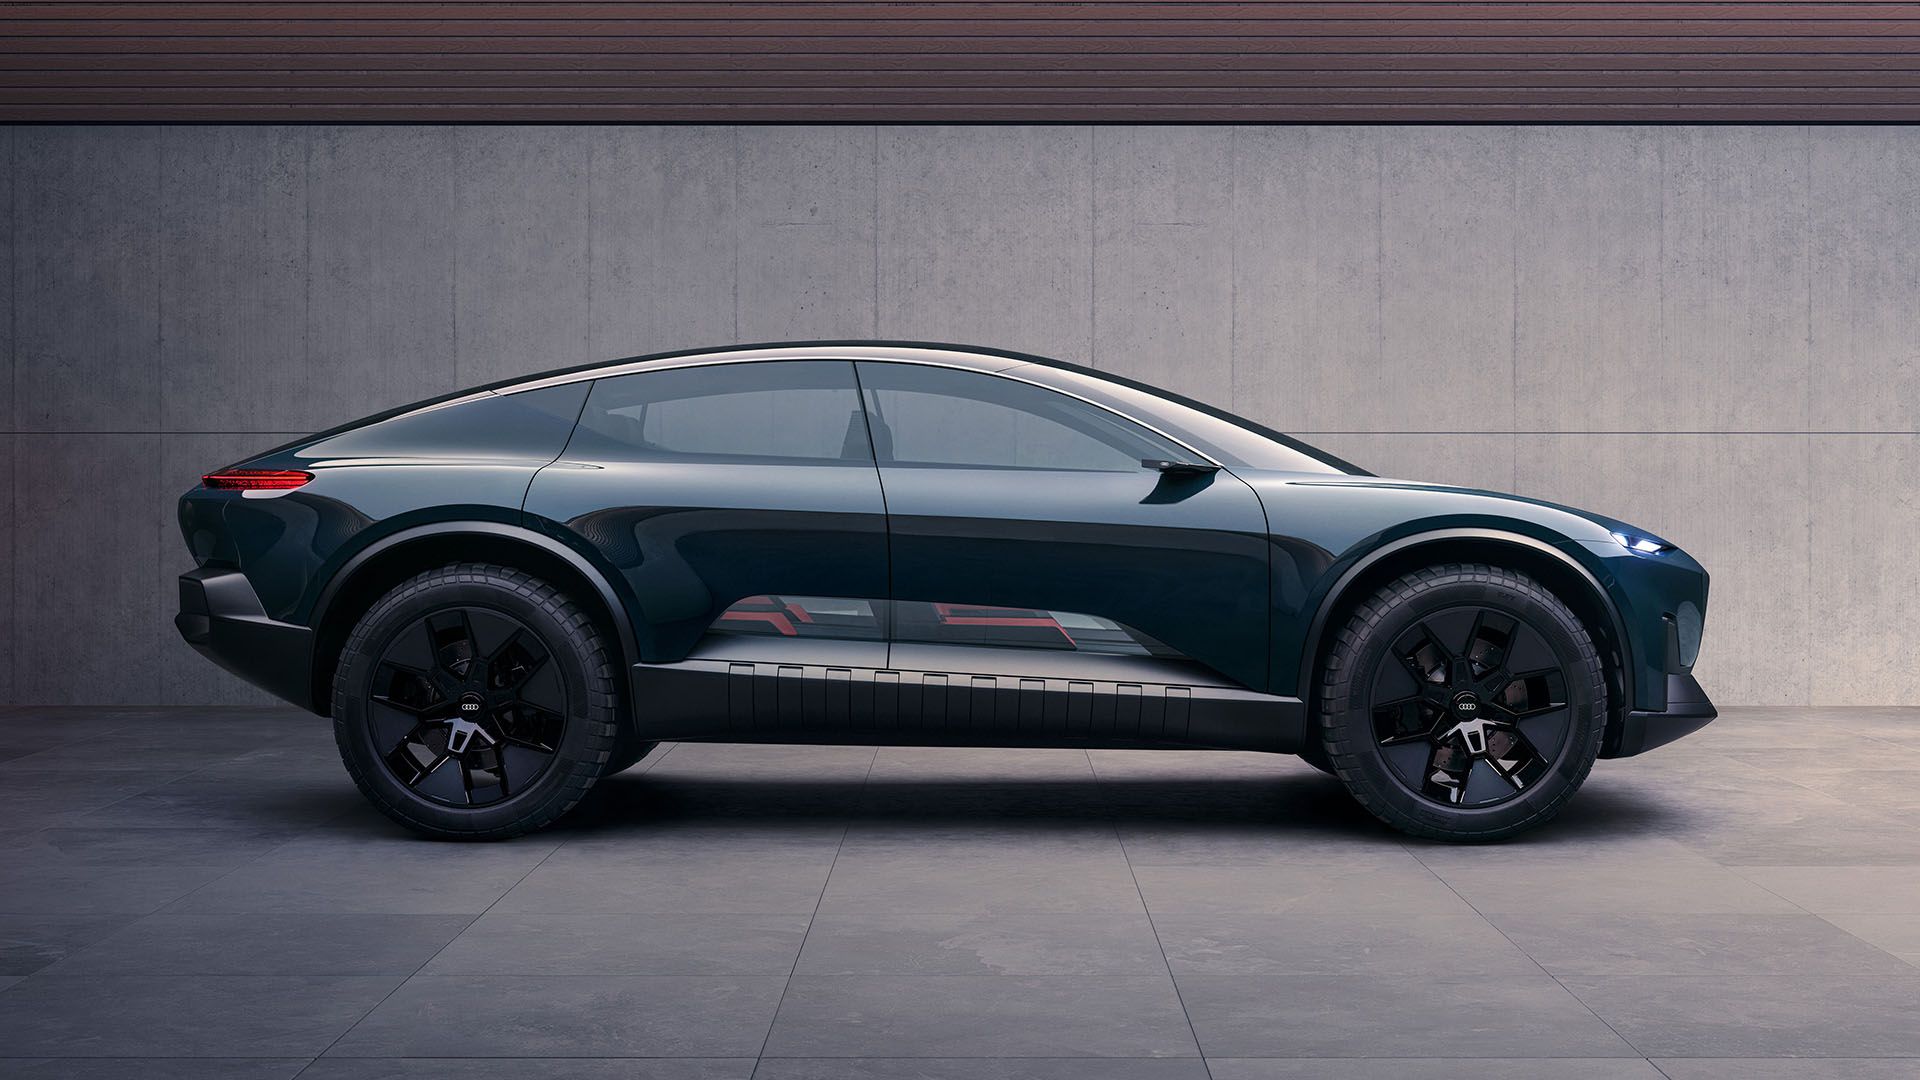 Side view of the Audi activesphere concept.